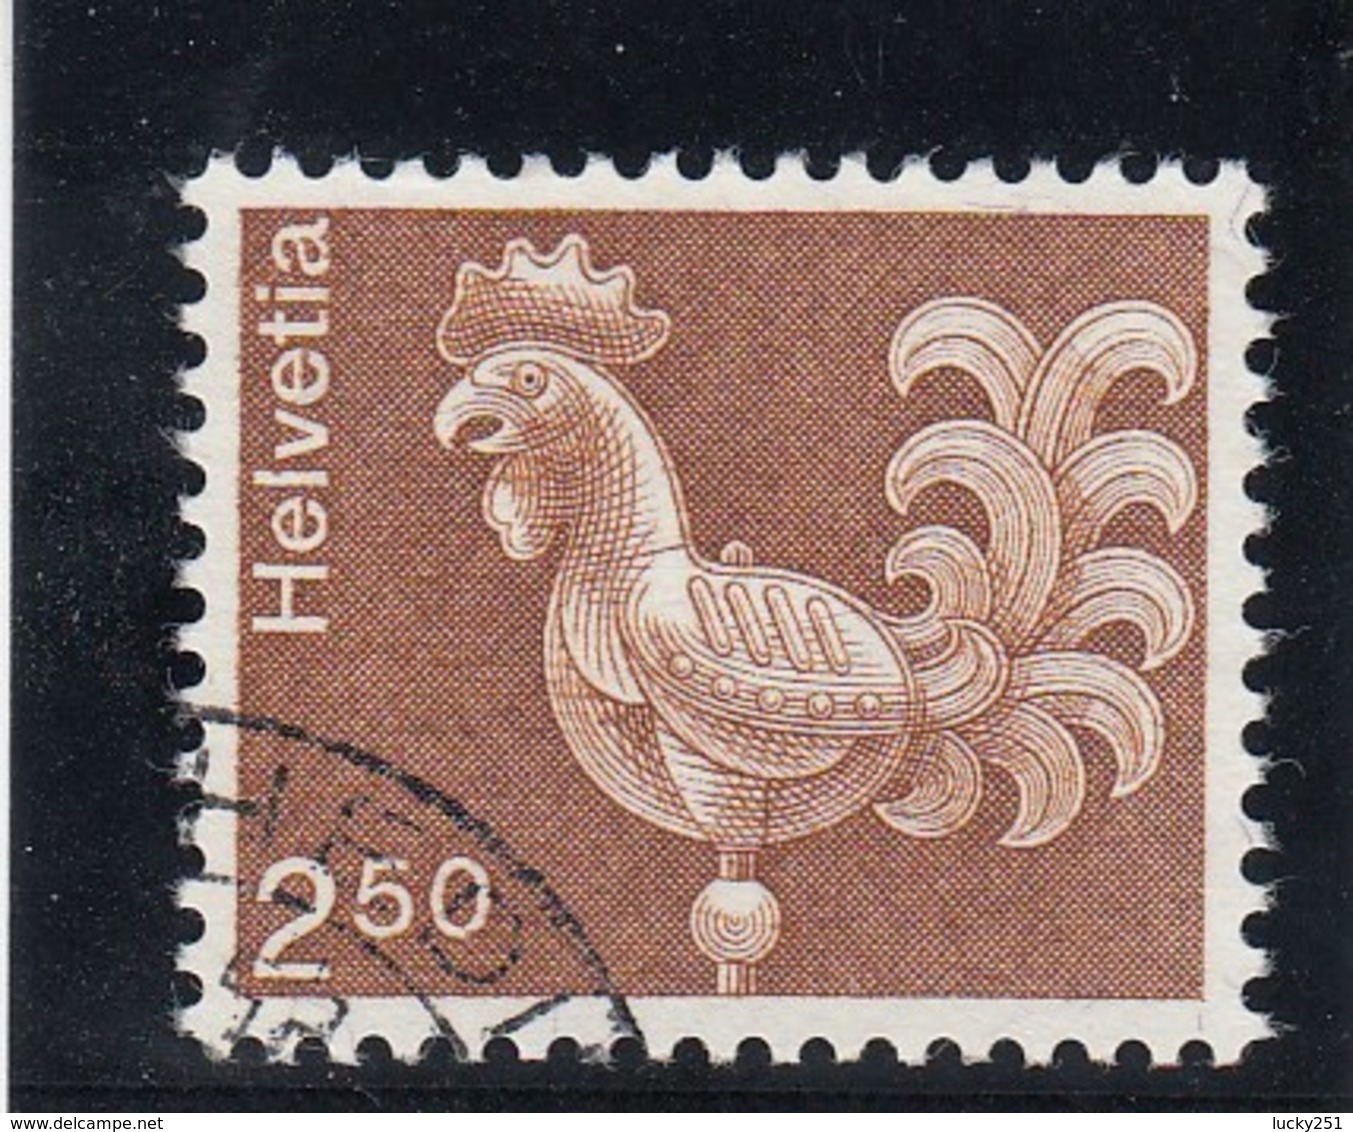 Suisse - 1975 - Oblit. - N° YT 991 - Coq - Used Stamps